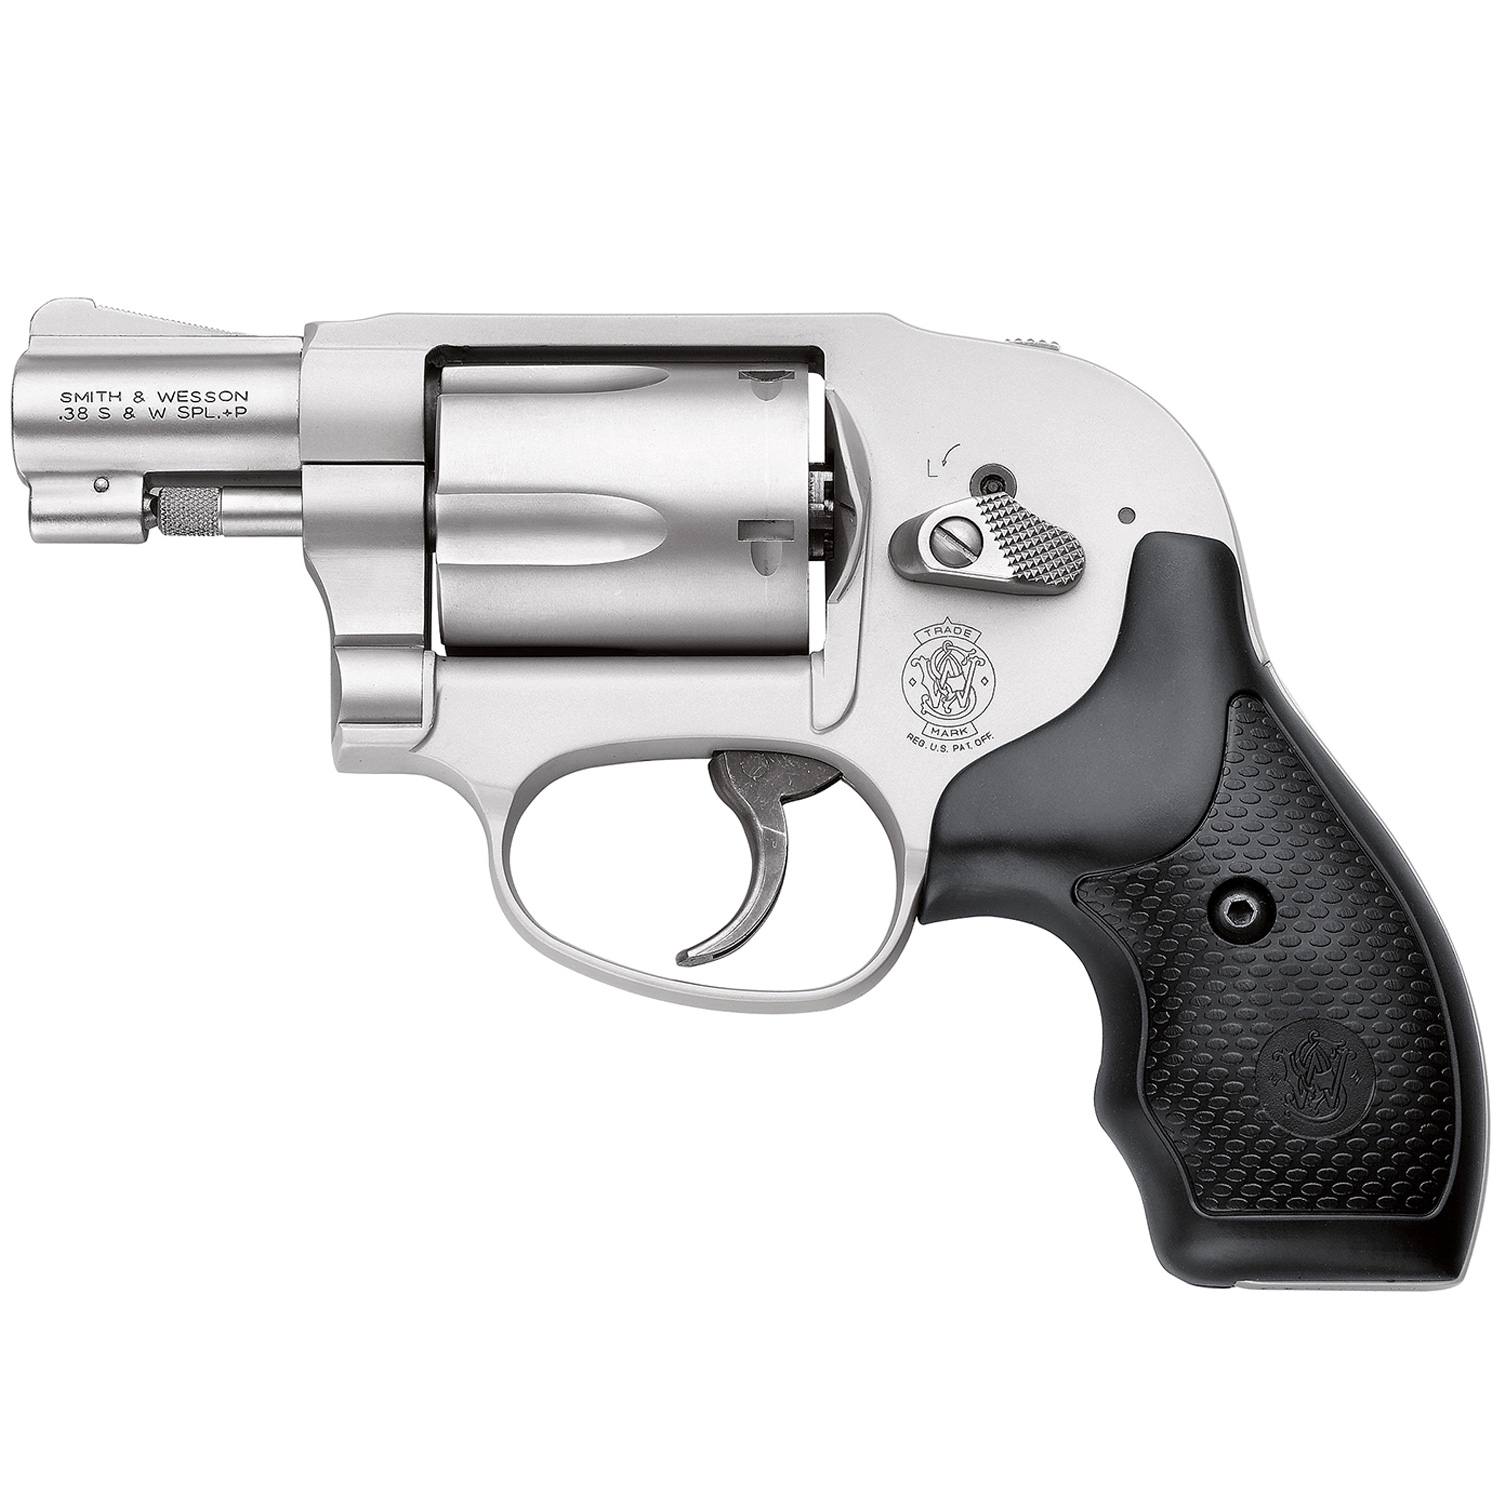 Smith & Wesson 637 AirWeight cal. 